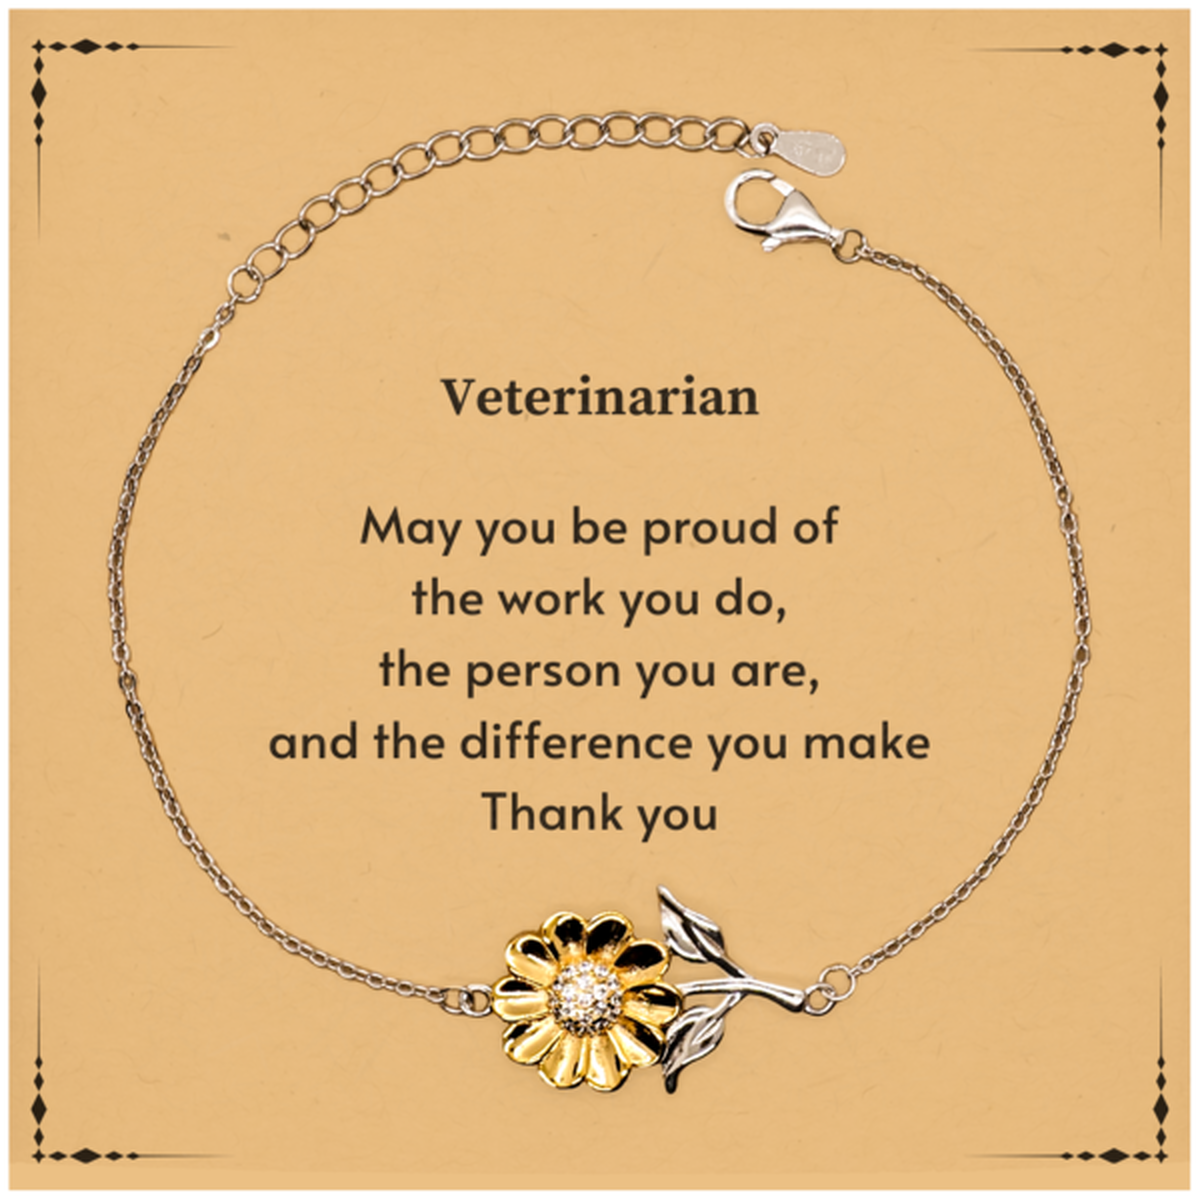 Heartwarming Sunflower Bracelet Retirement Coworkers Gifts for Veterinarian, Veterinarian May You be proud of the work you do, the person you are Gifts for Boss Men Women Friends